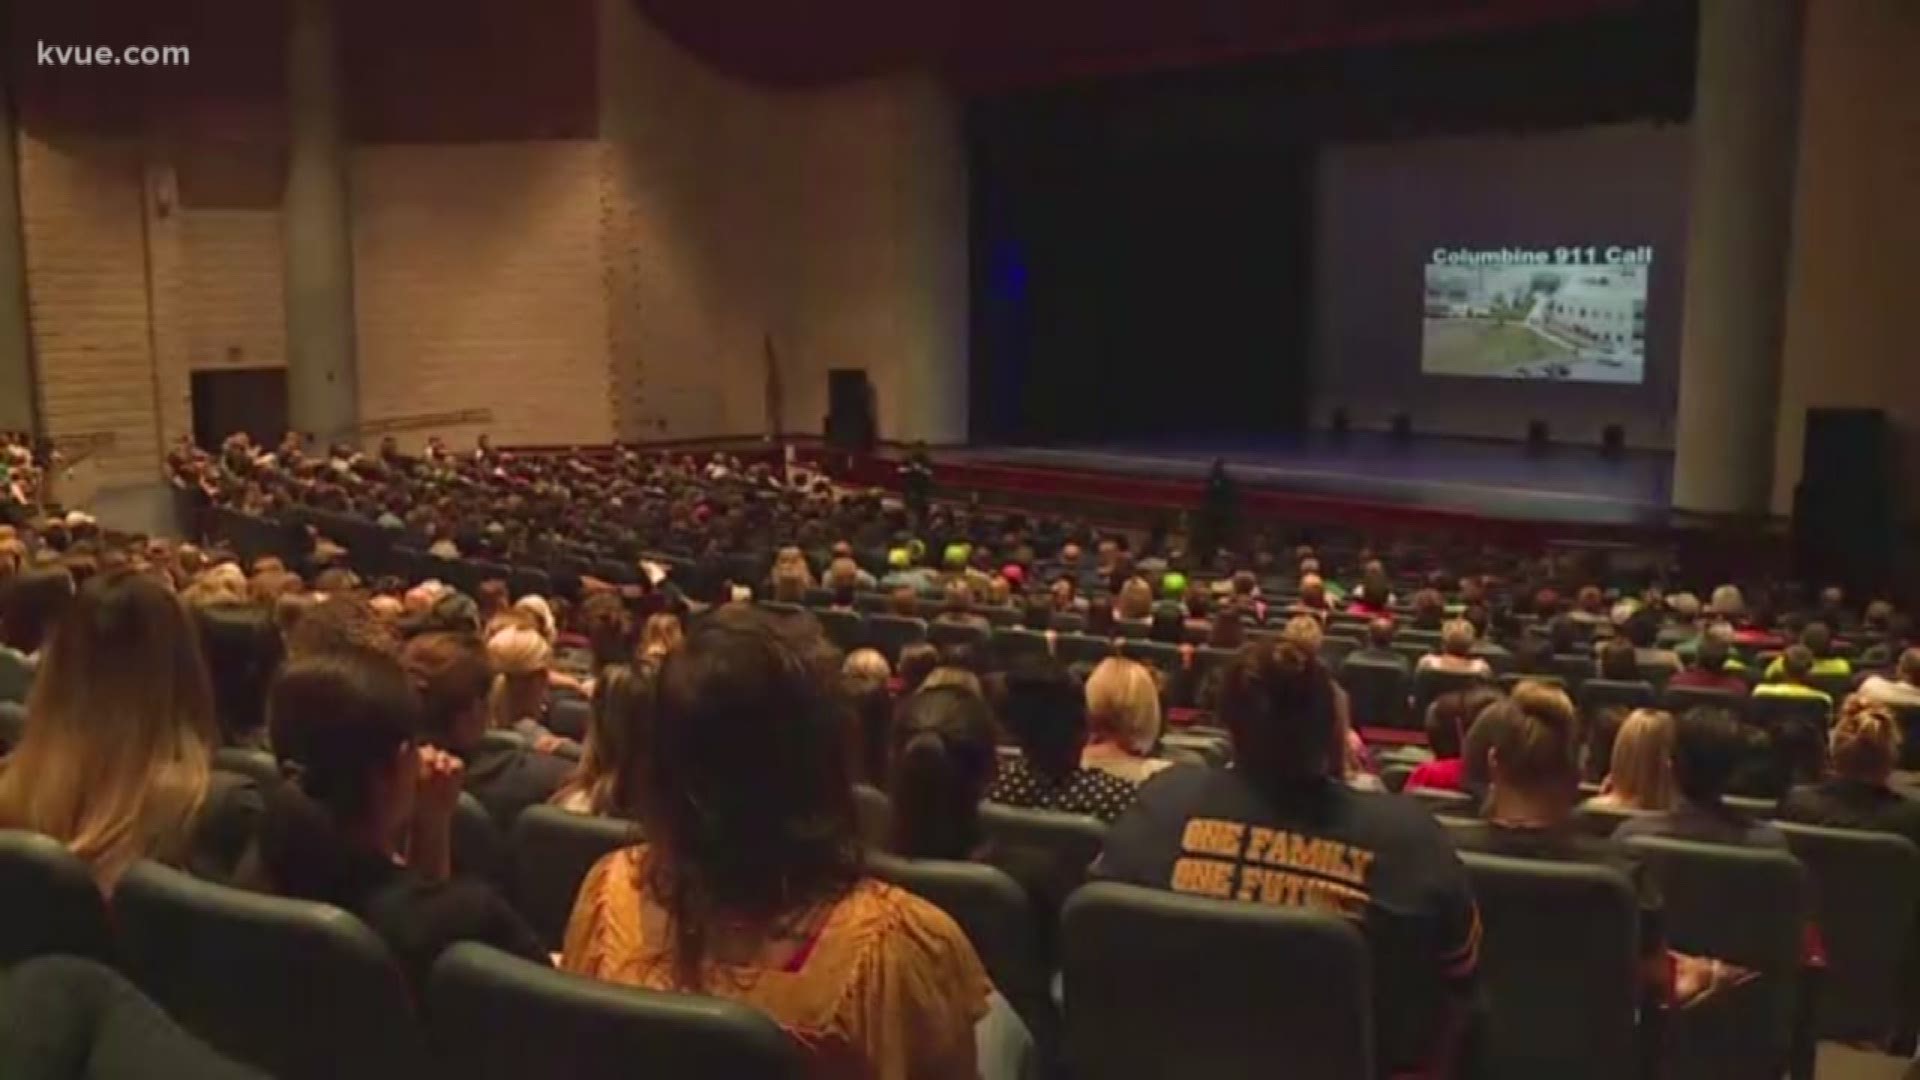 Before students in Central Texas head back to class tomorrow, most teachers are preparing seating charts and lesson plans. Educators in Round Rock are learning how to respond to an active shooter.